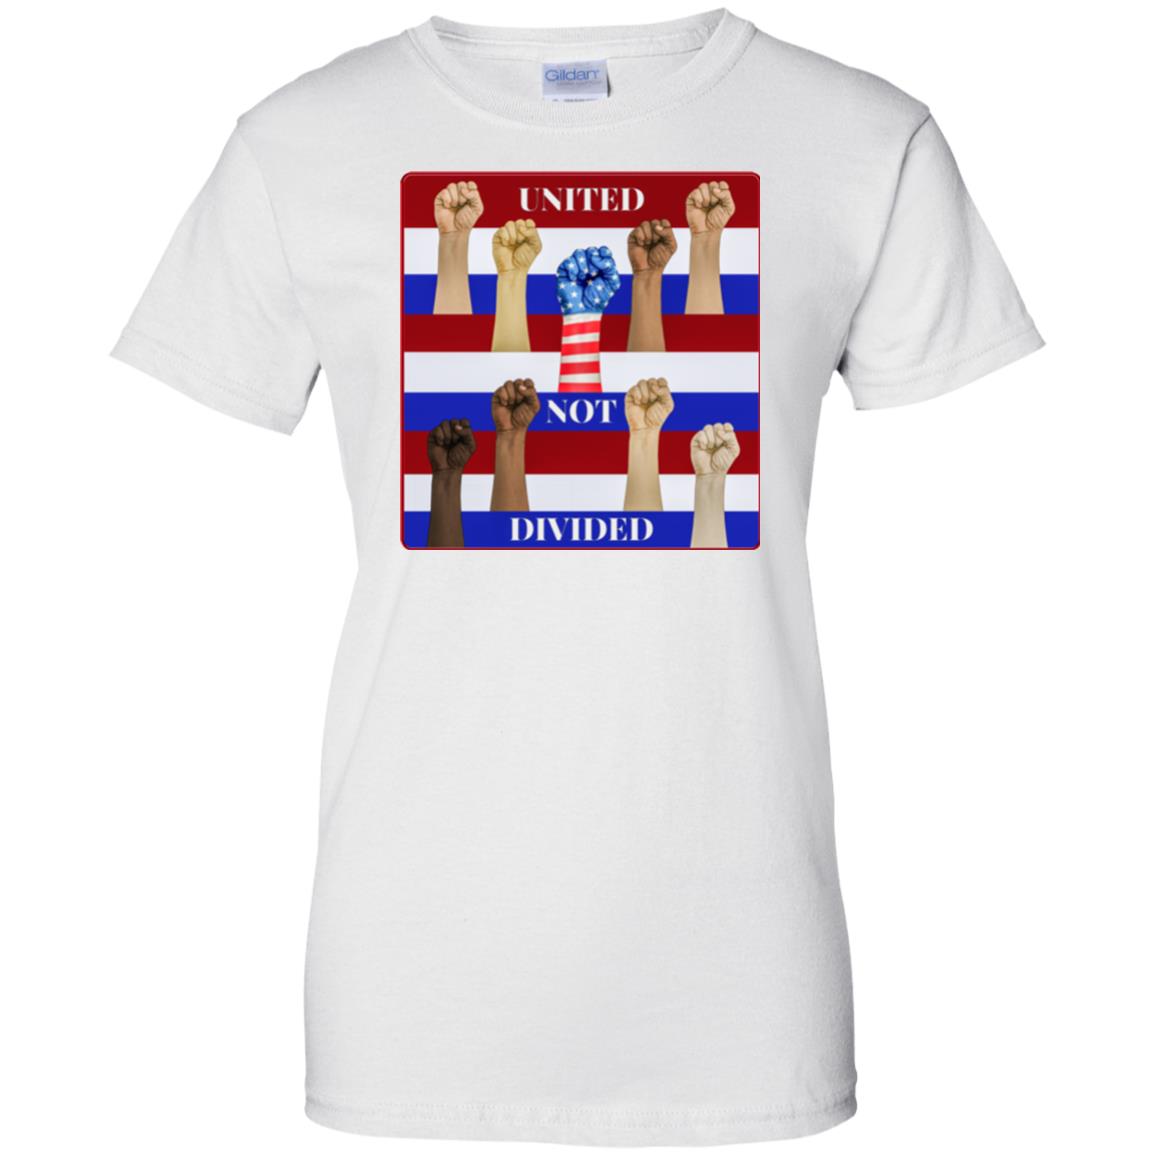 united not divided - Women's Relaxed Fit T-Shirt